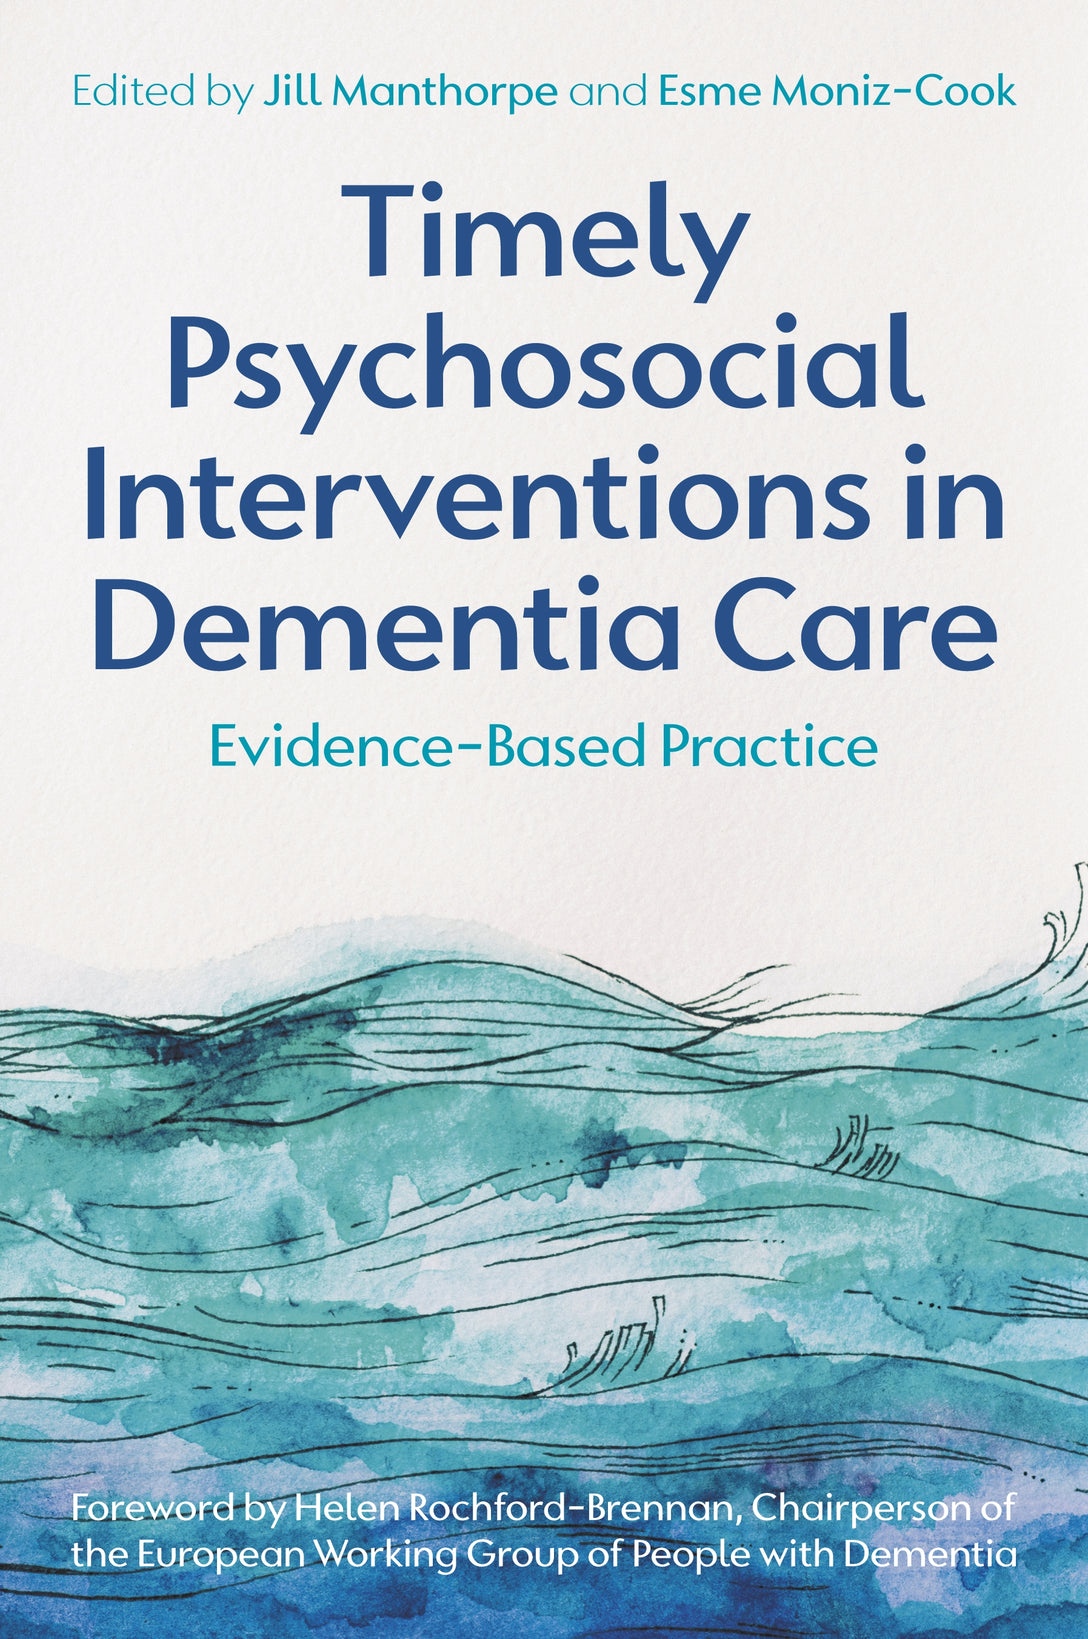 Timely Psychosocial Interventions in Dementia Care by Jill Manthorpe, Esme Moniz-Cook, No Author Listed, Helen Rochford-Brennan